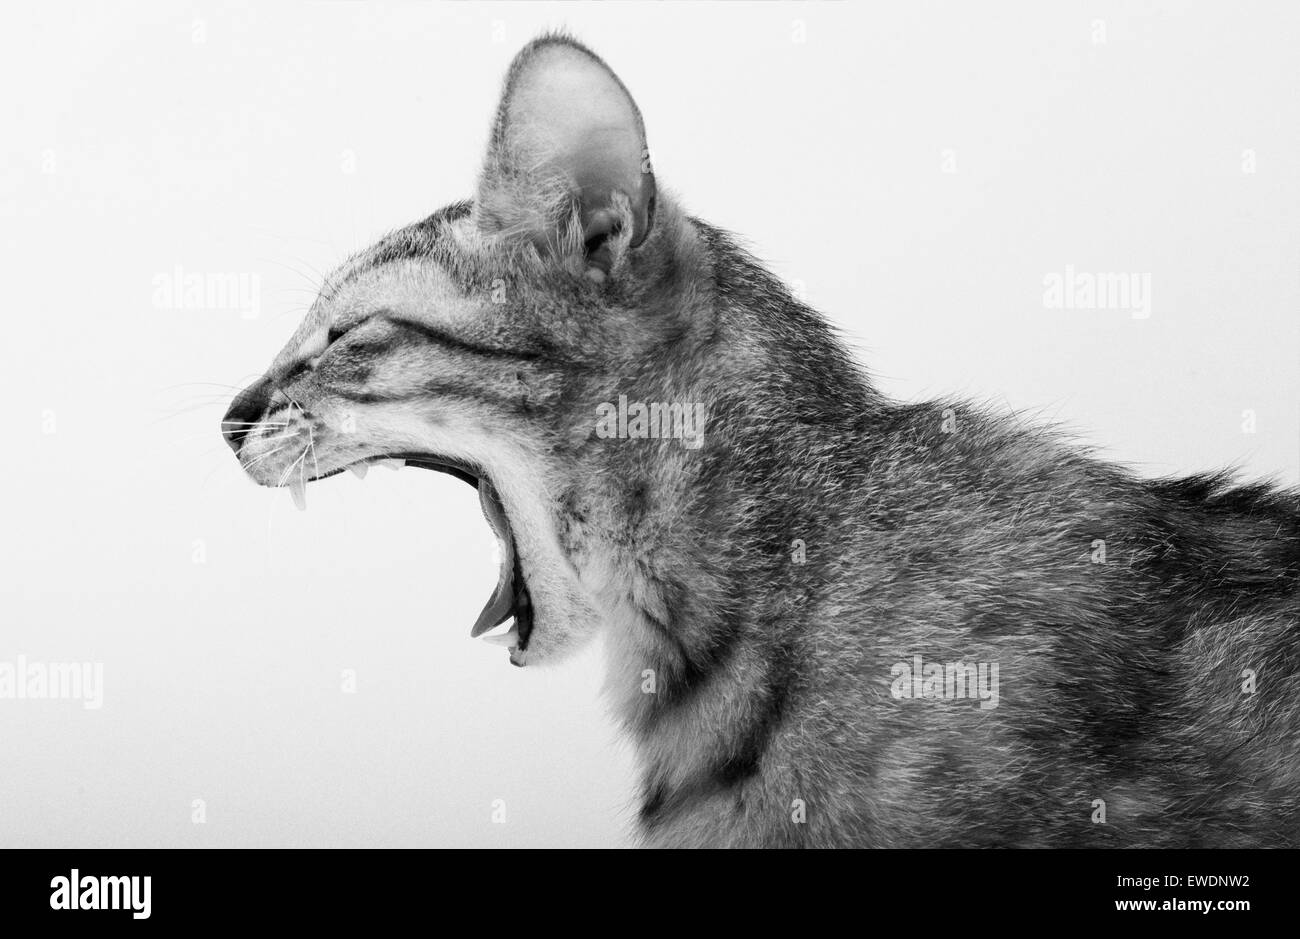 This image shows a Iggy, a 7 month old cat, yawning, against a white background in Hong Kong on 21 June 2015 Stock Photo